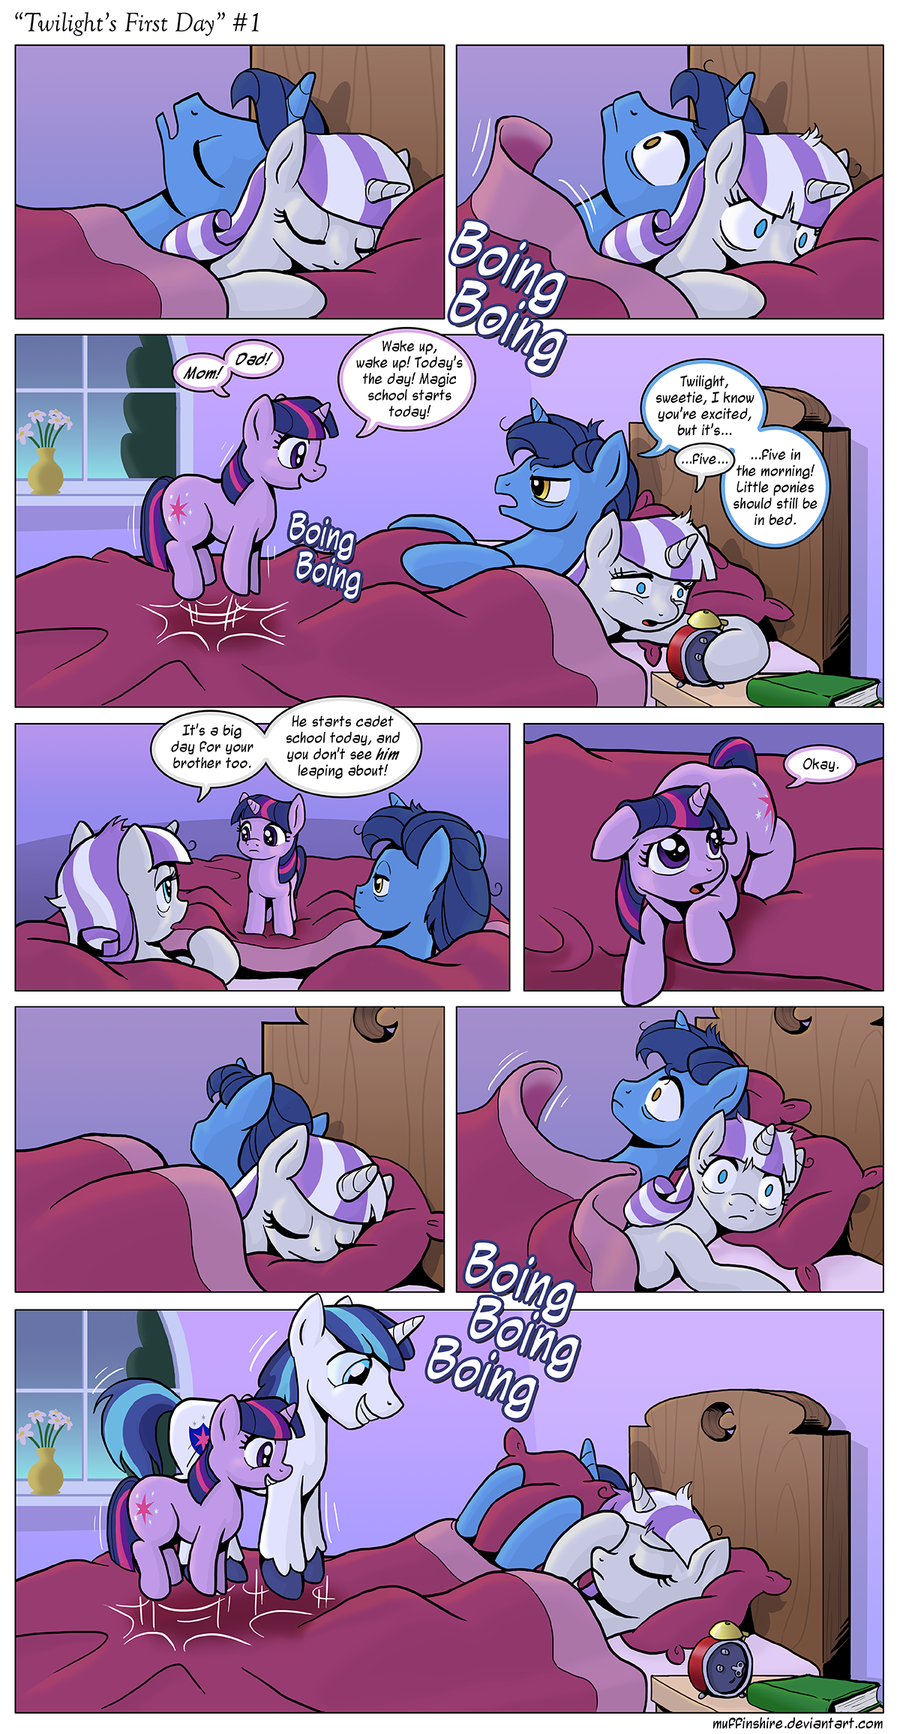 comic___twilight__s_first_day__1_by_muff